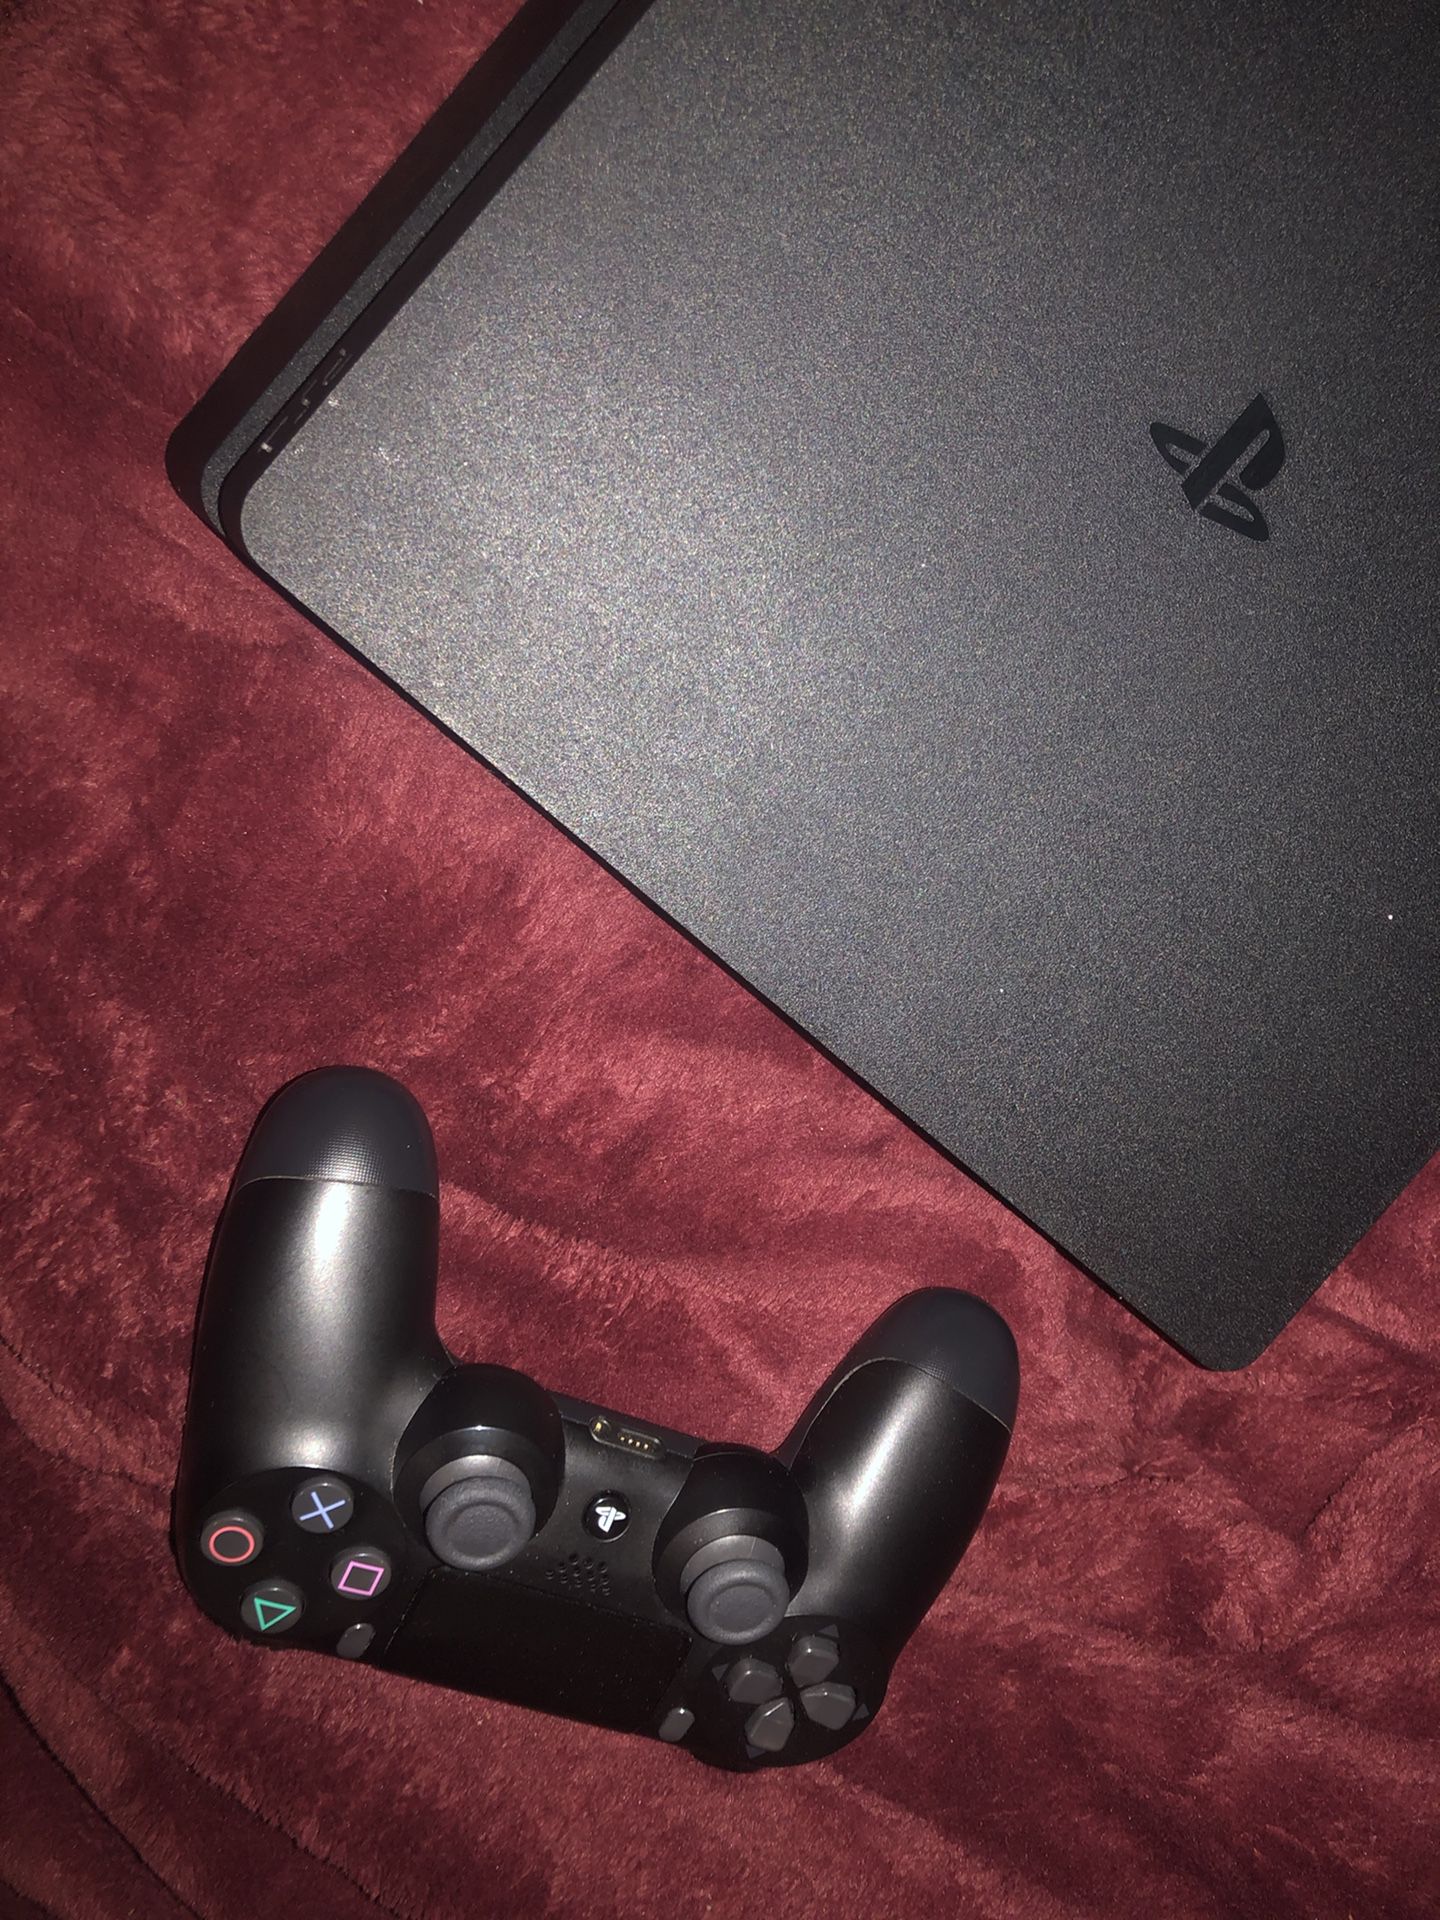 Ps4 slim w 2 controllers